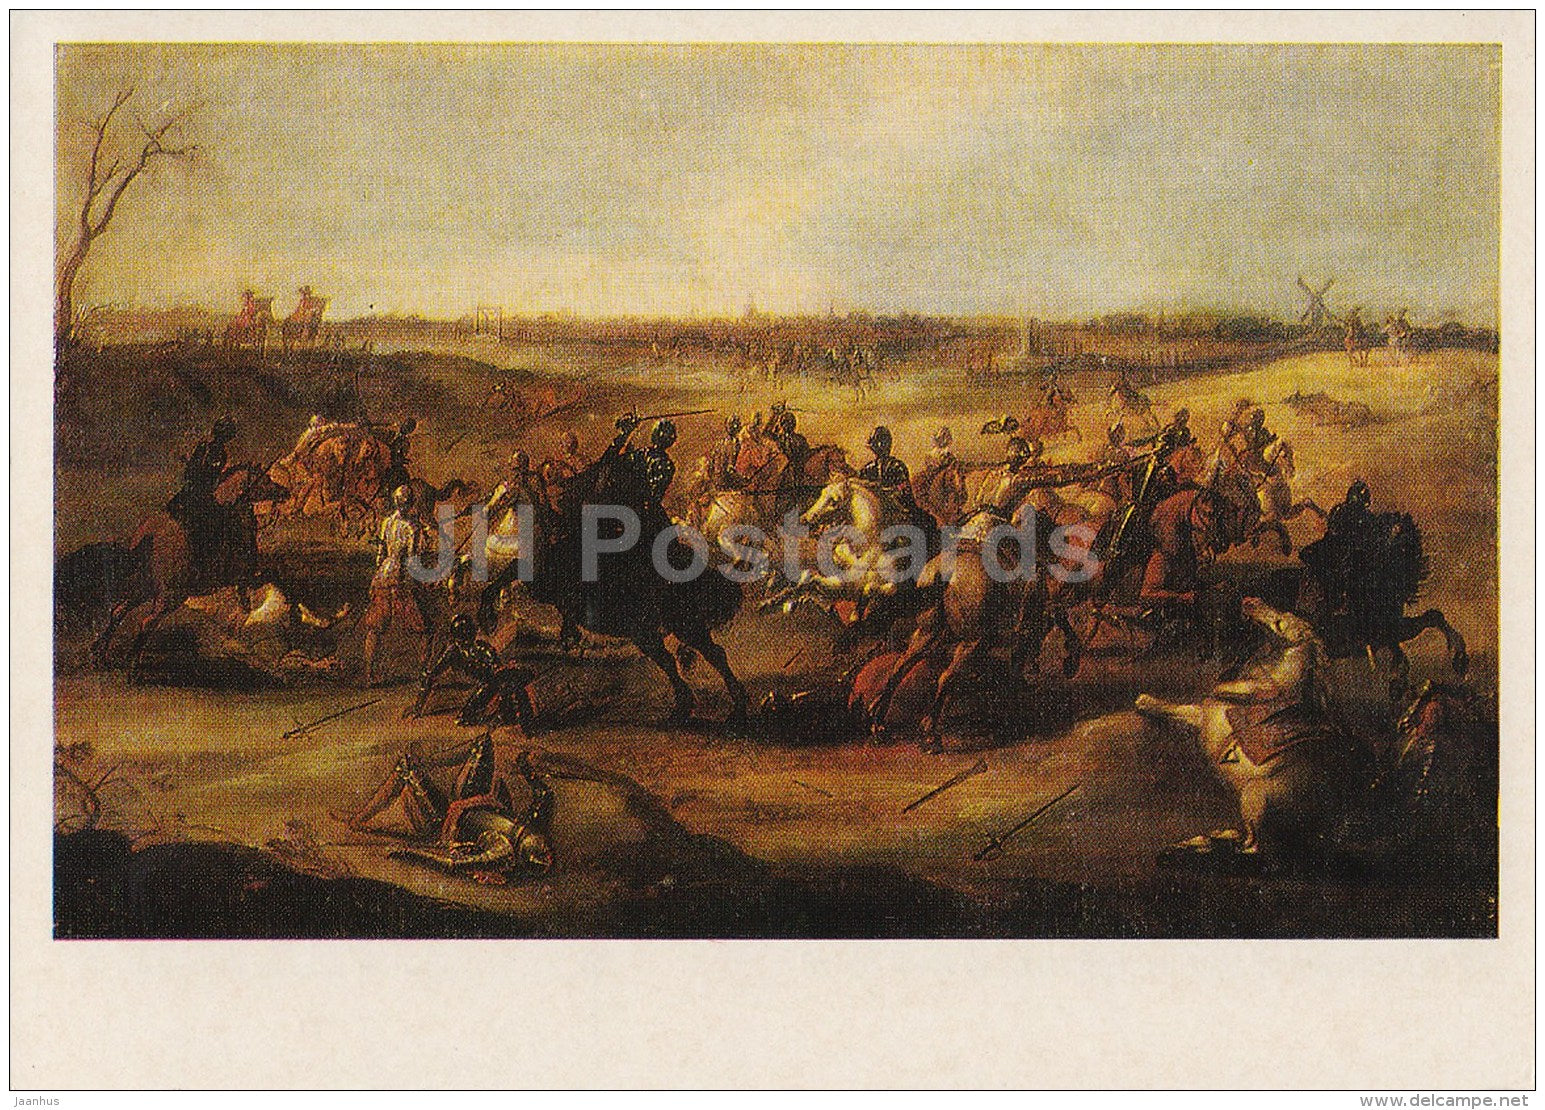 painting by Peter Snayers - Knights duel - battle - Flemish art - 1974 - Russia USSR - unused - JH Postcards